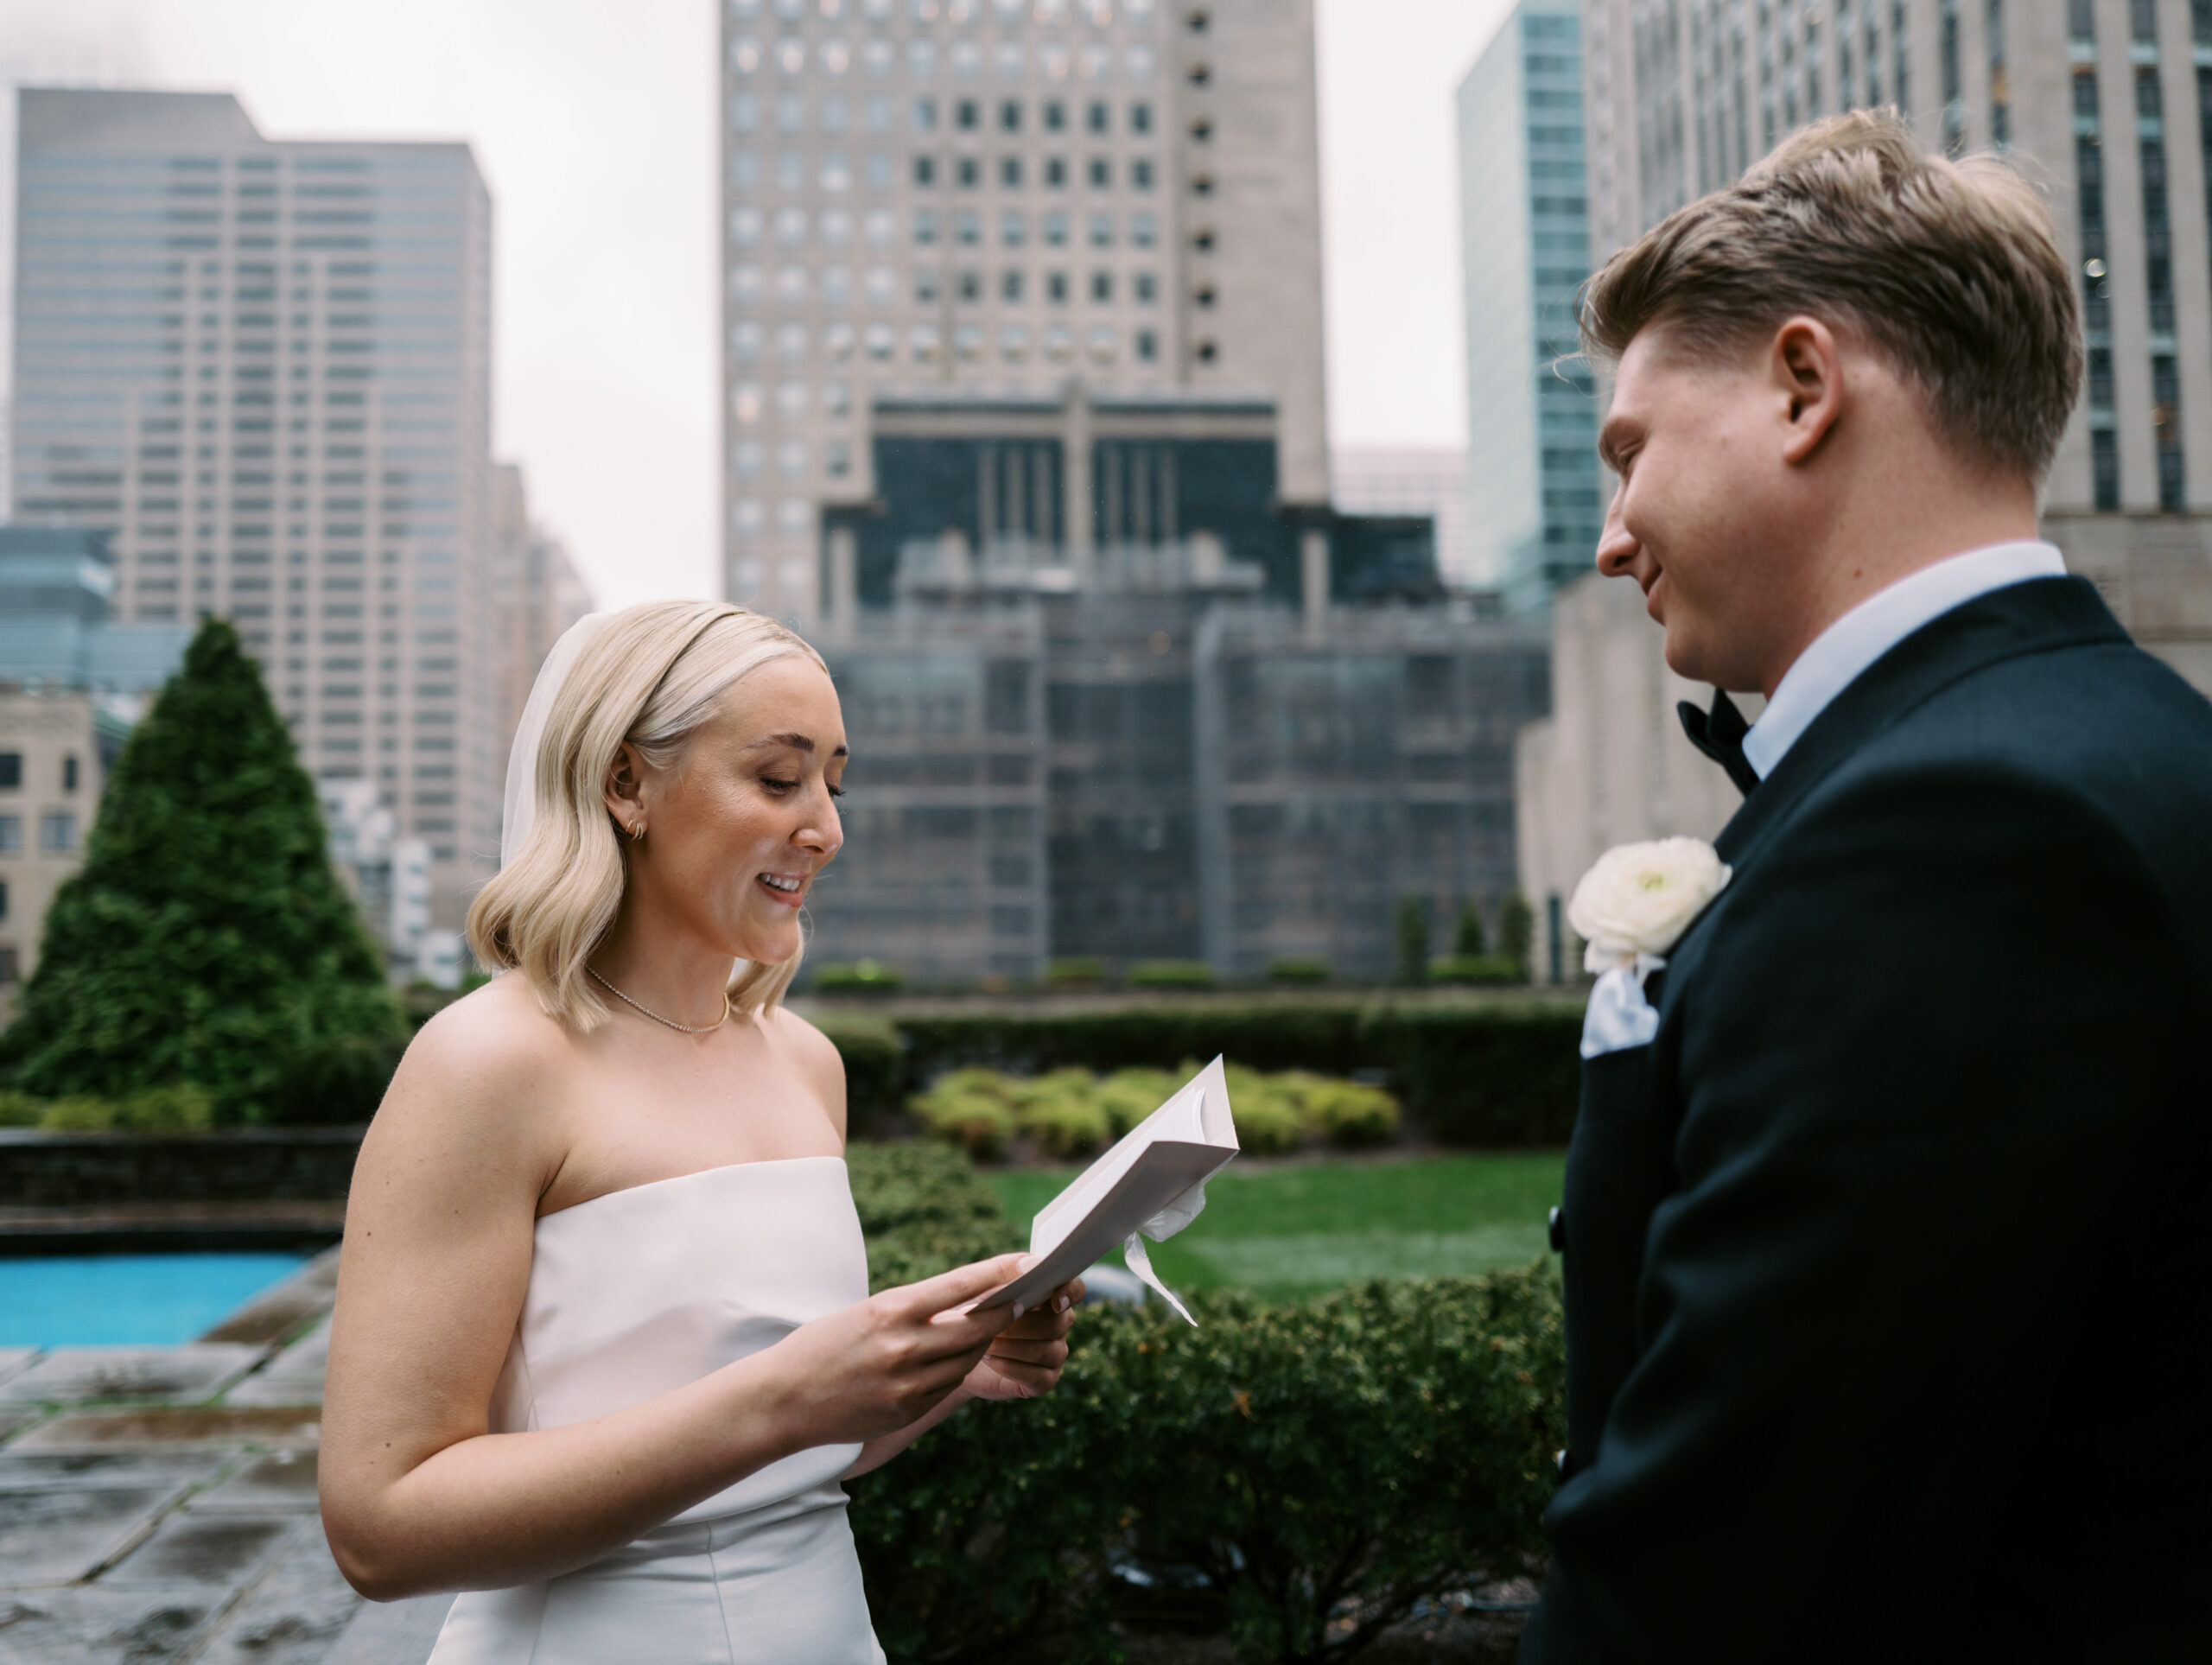 The bride is reading a letter to her groom before the wedding ceremony while the groom is lovingly listening. Image by Jenny Fu Studio